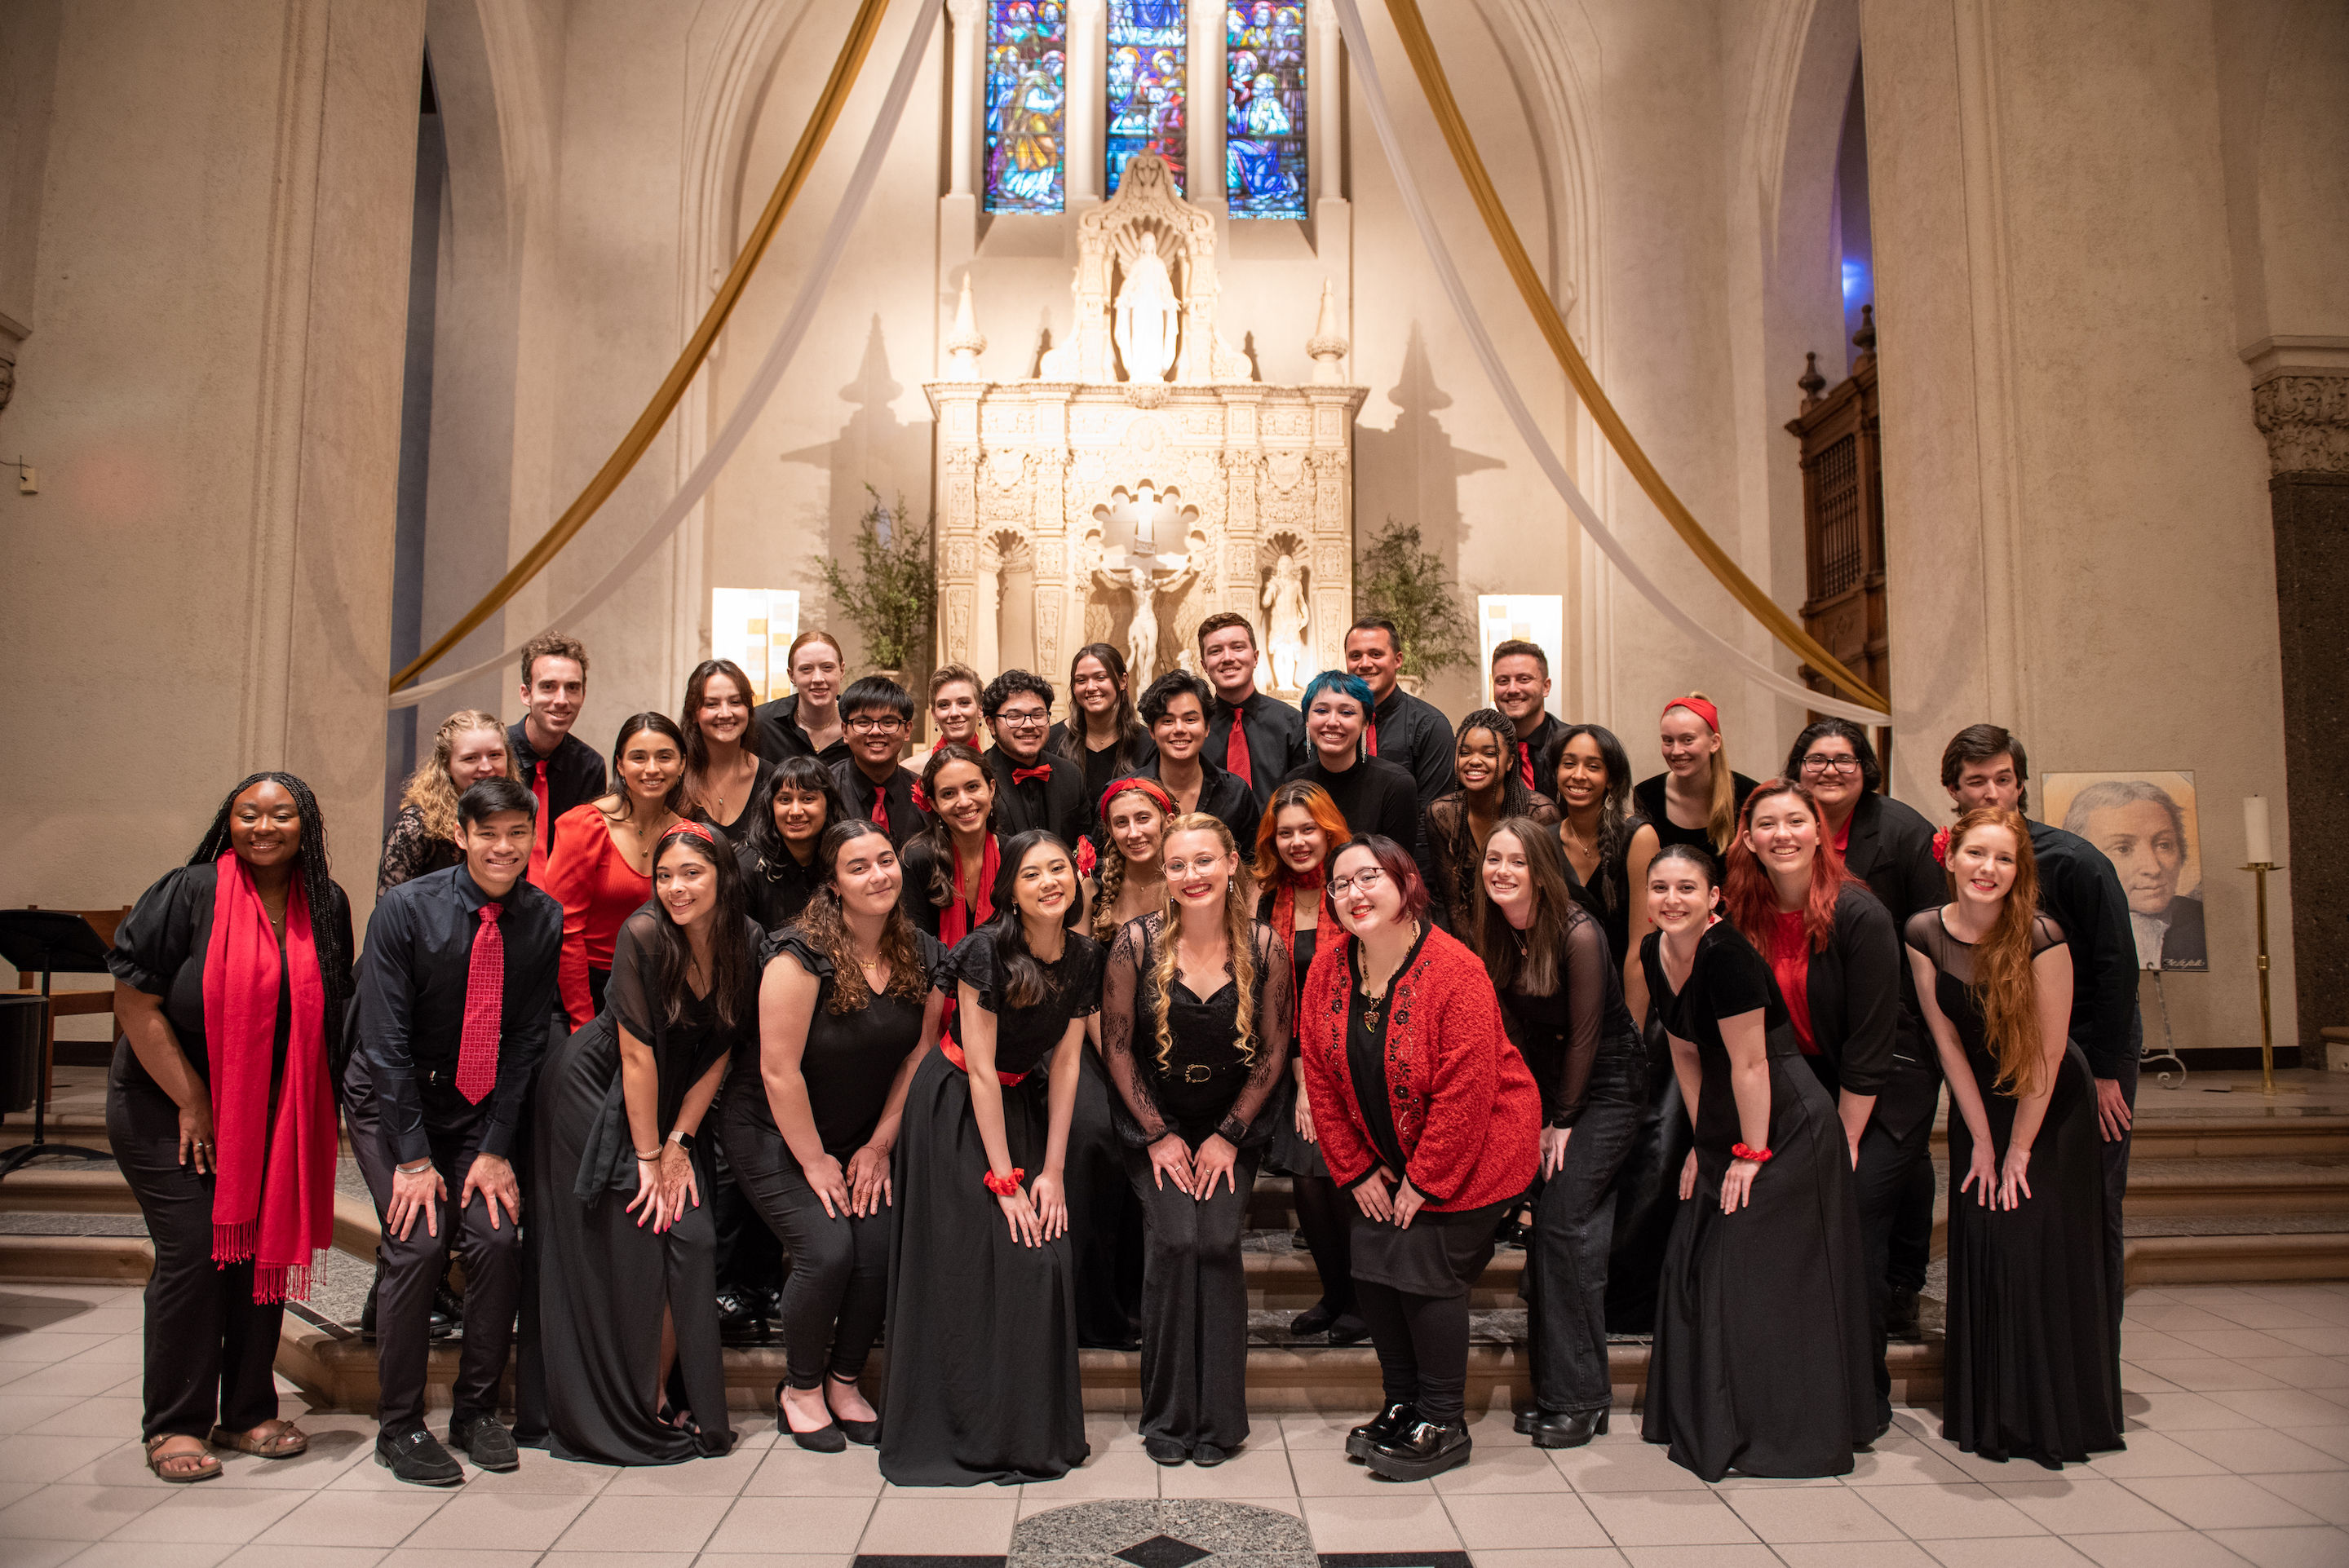 Members of SMC Choir in front of the Chapel altar posing for photo